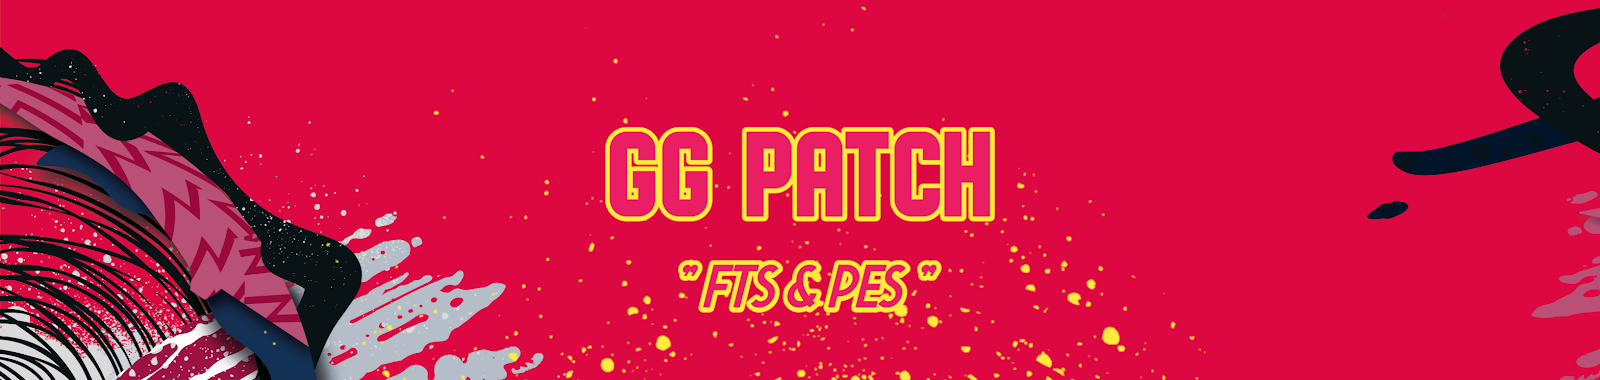 GG PATCH 